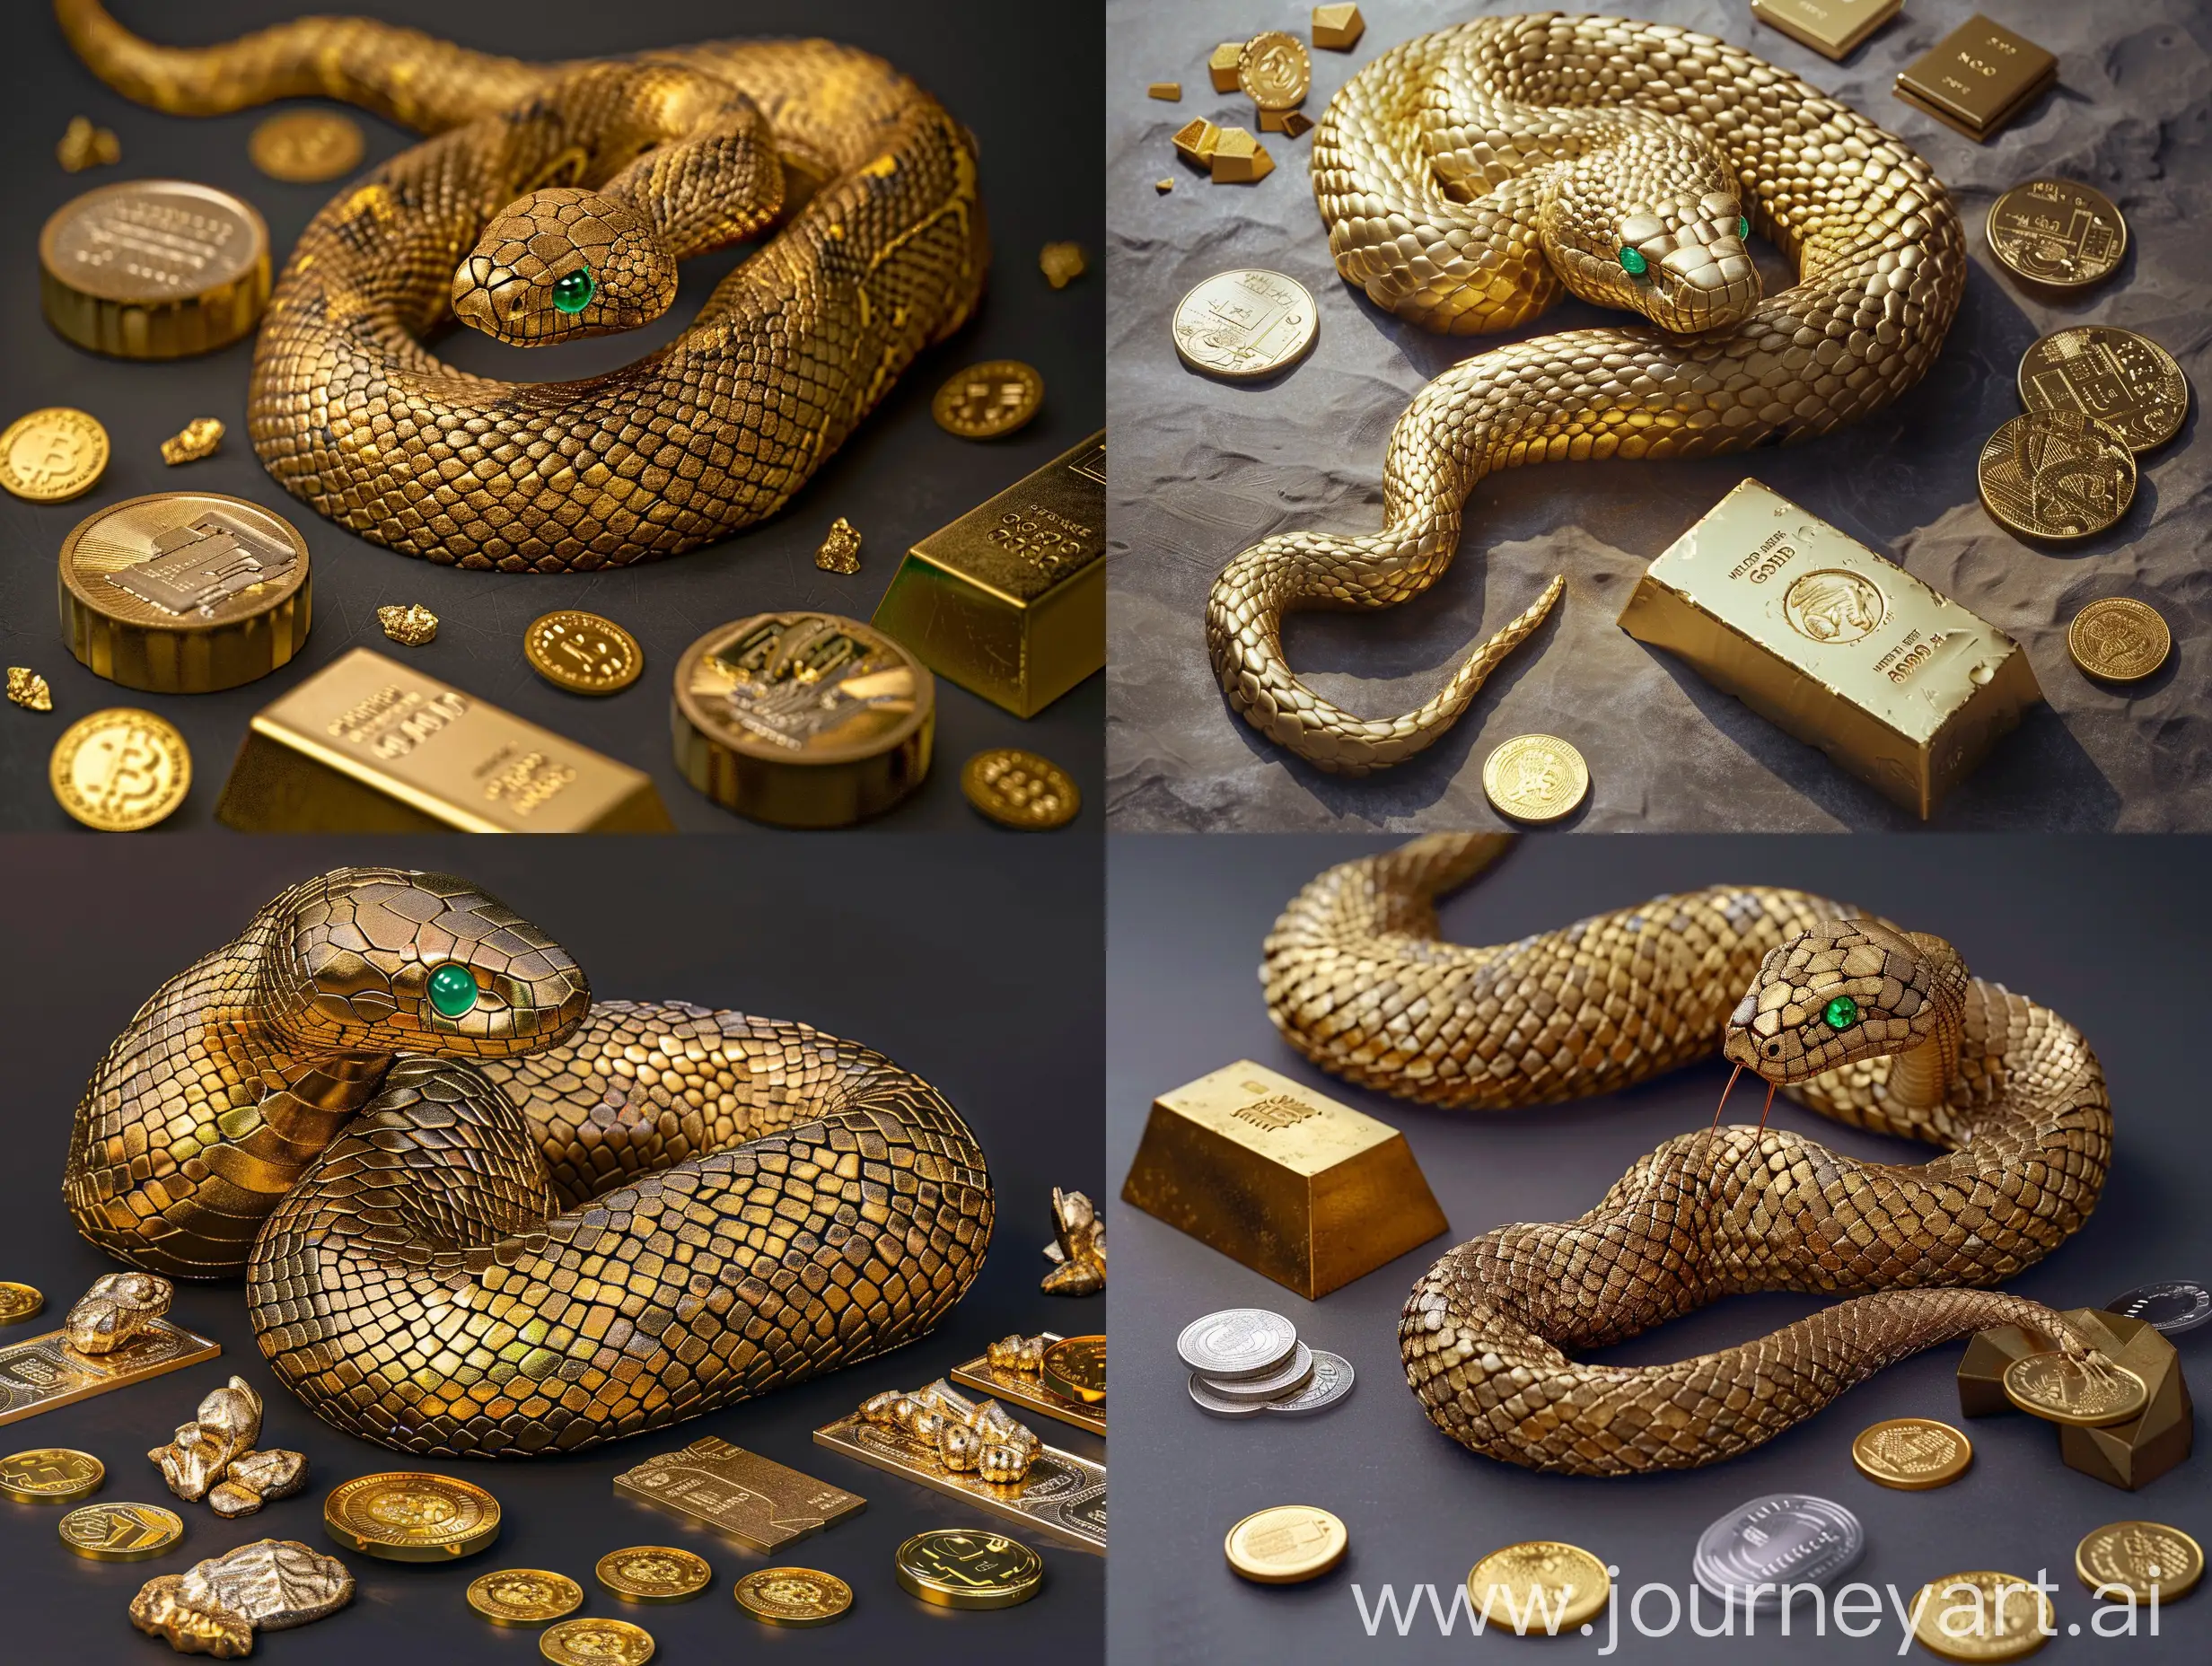 Realistic-Snake-Sculpture-with-Emerald-Eyes-Surrounded-by-Gold-Bars-and-Coins